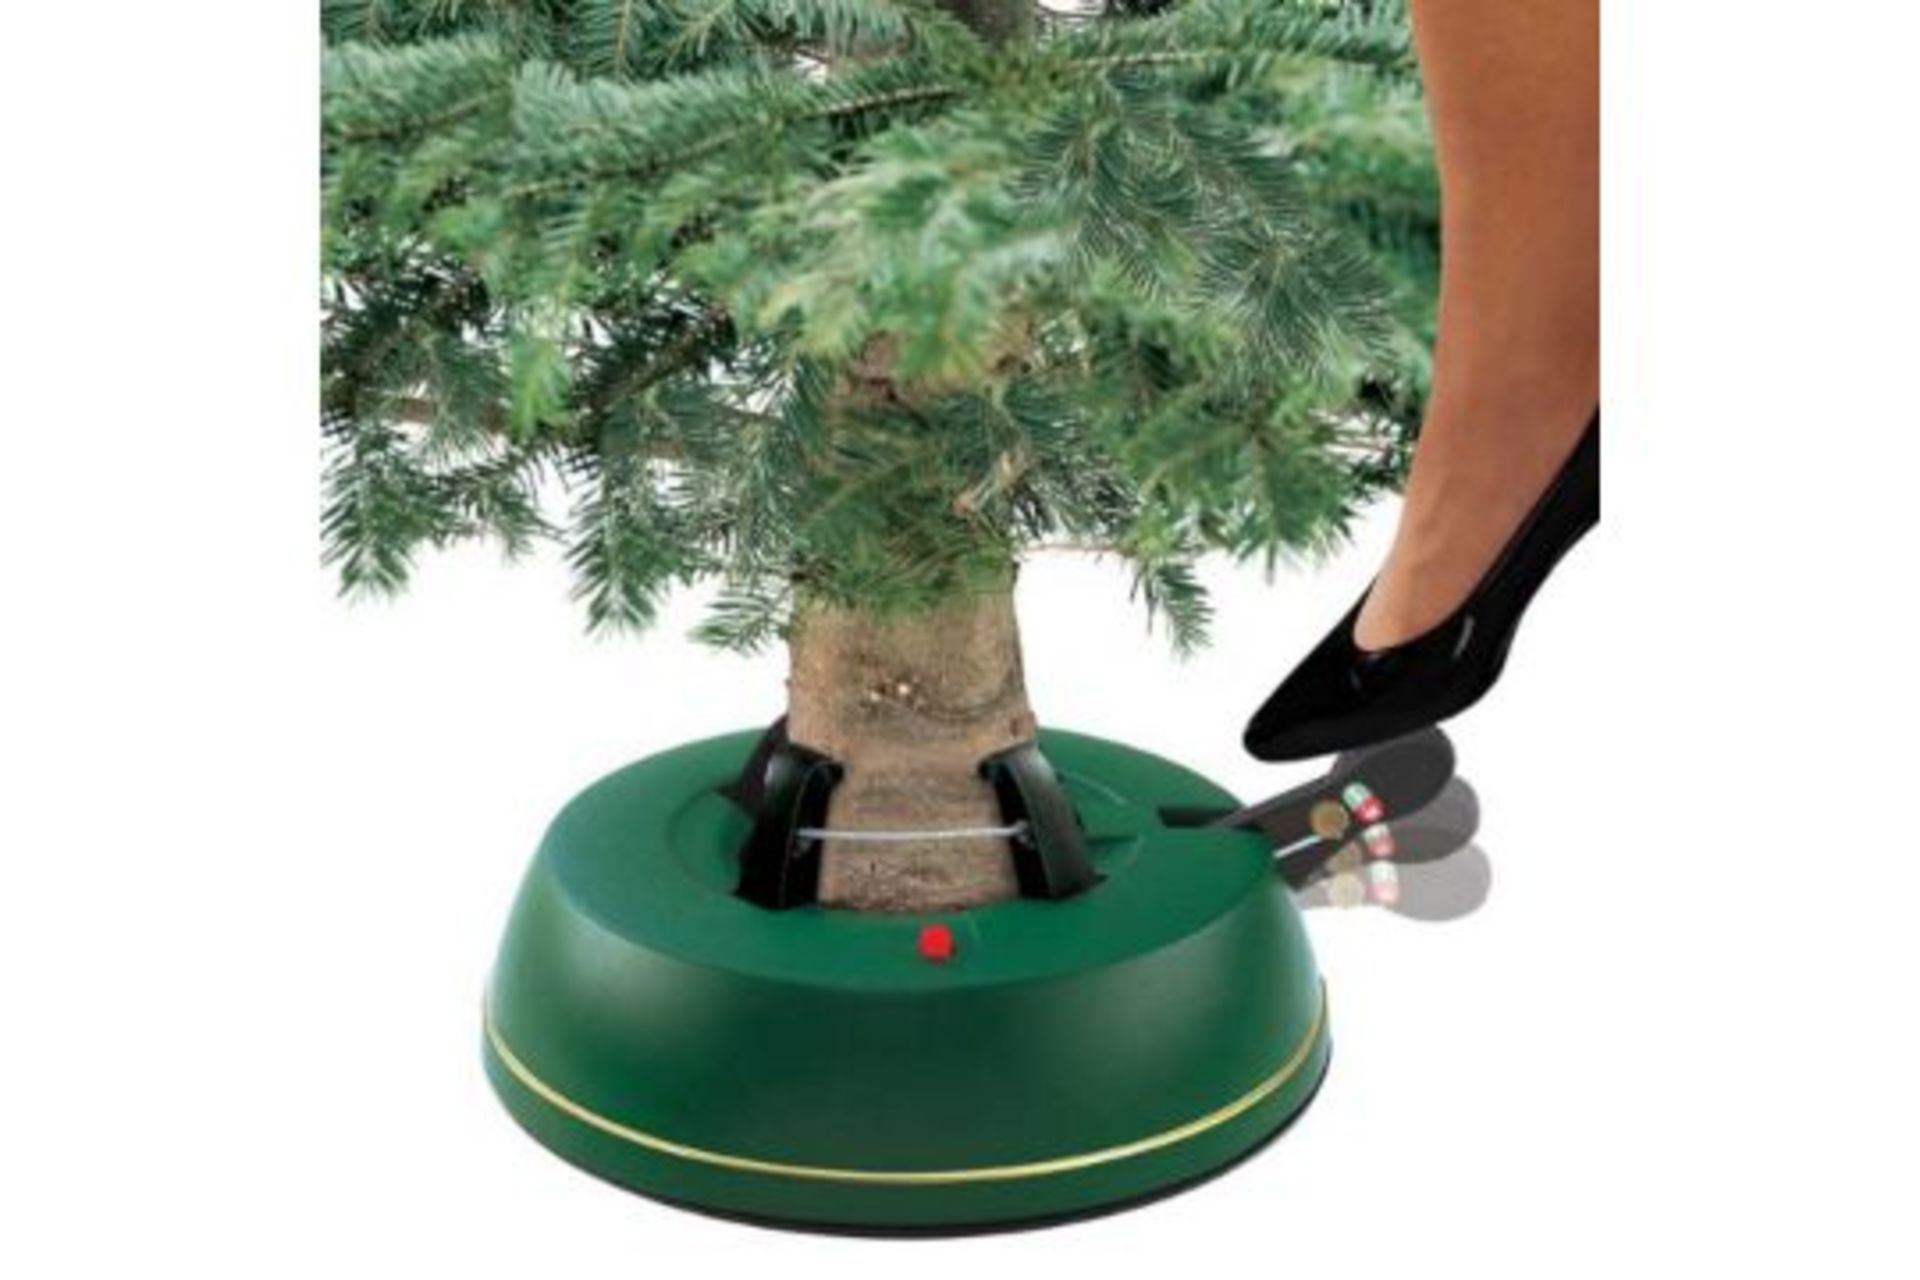 BRAND NEW MELINERA CHRISTMAN TREE STAND - RRP £27.99. - Image 2 of 2